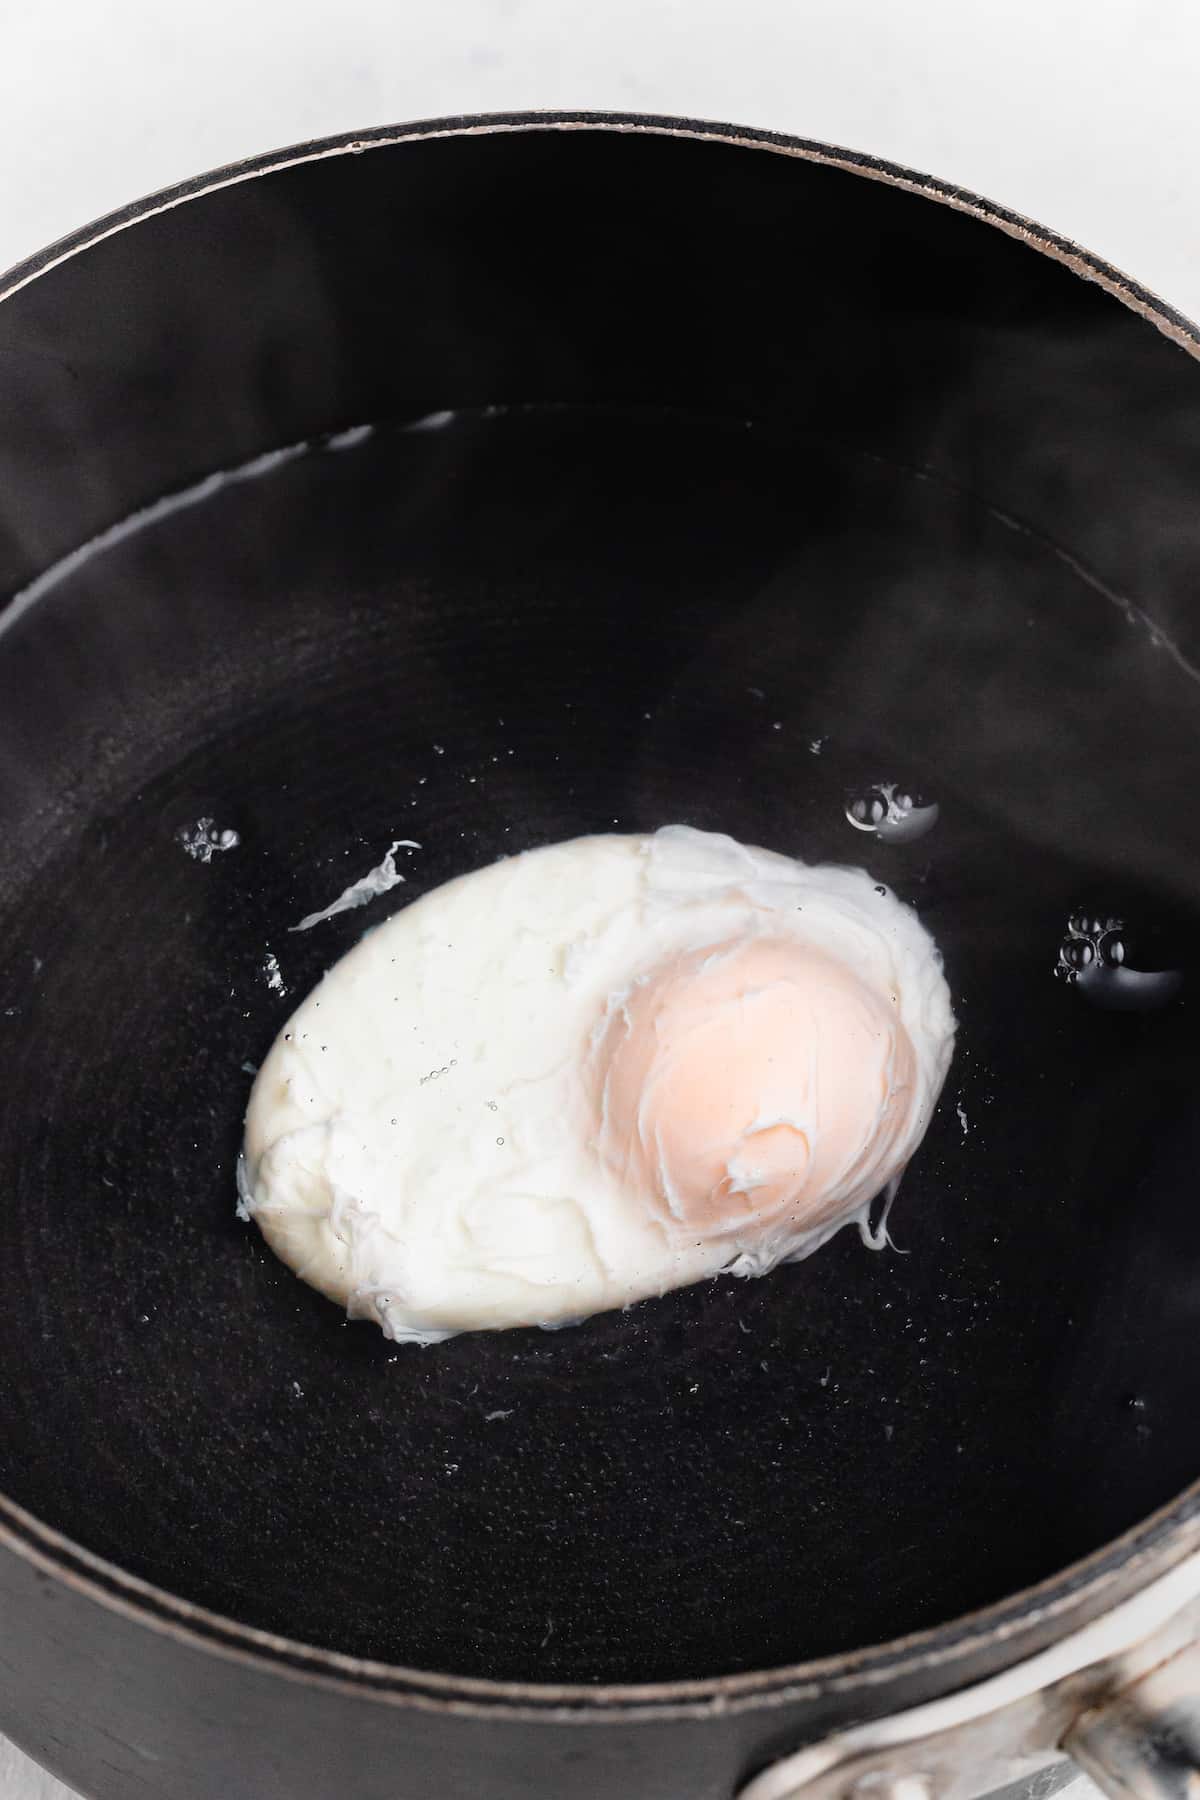 An egg cooking in water